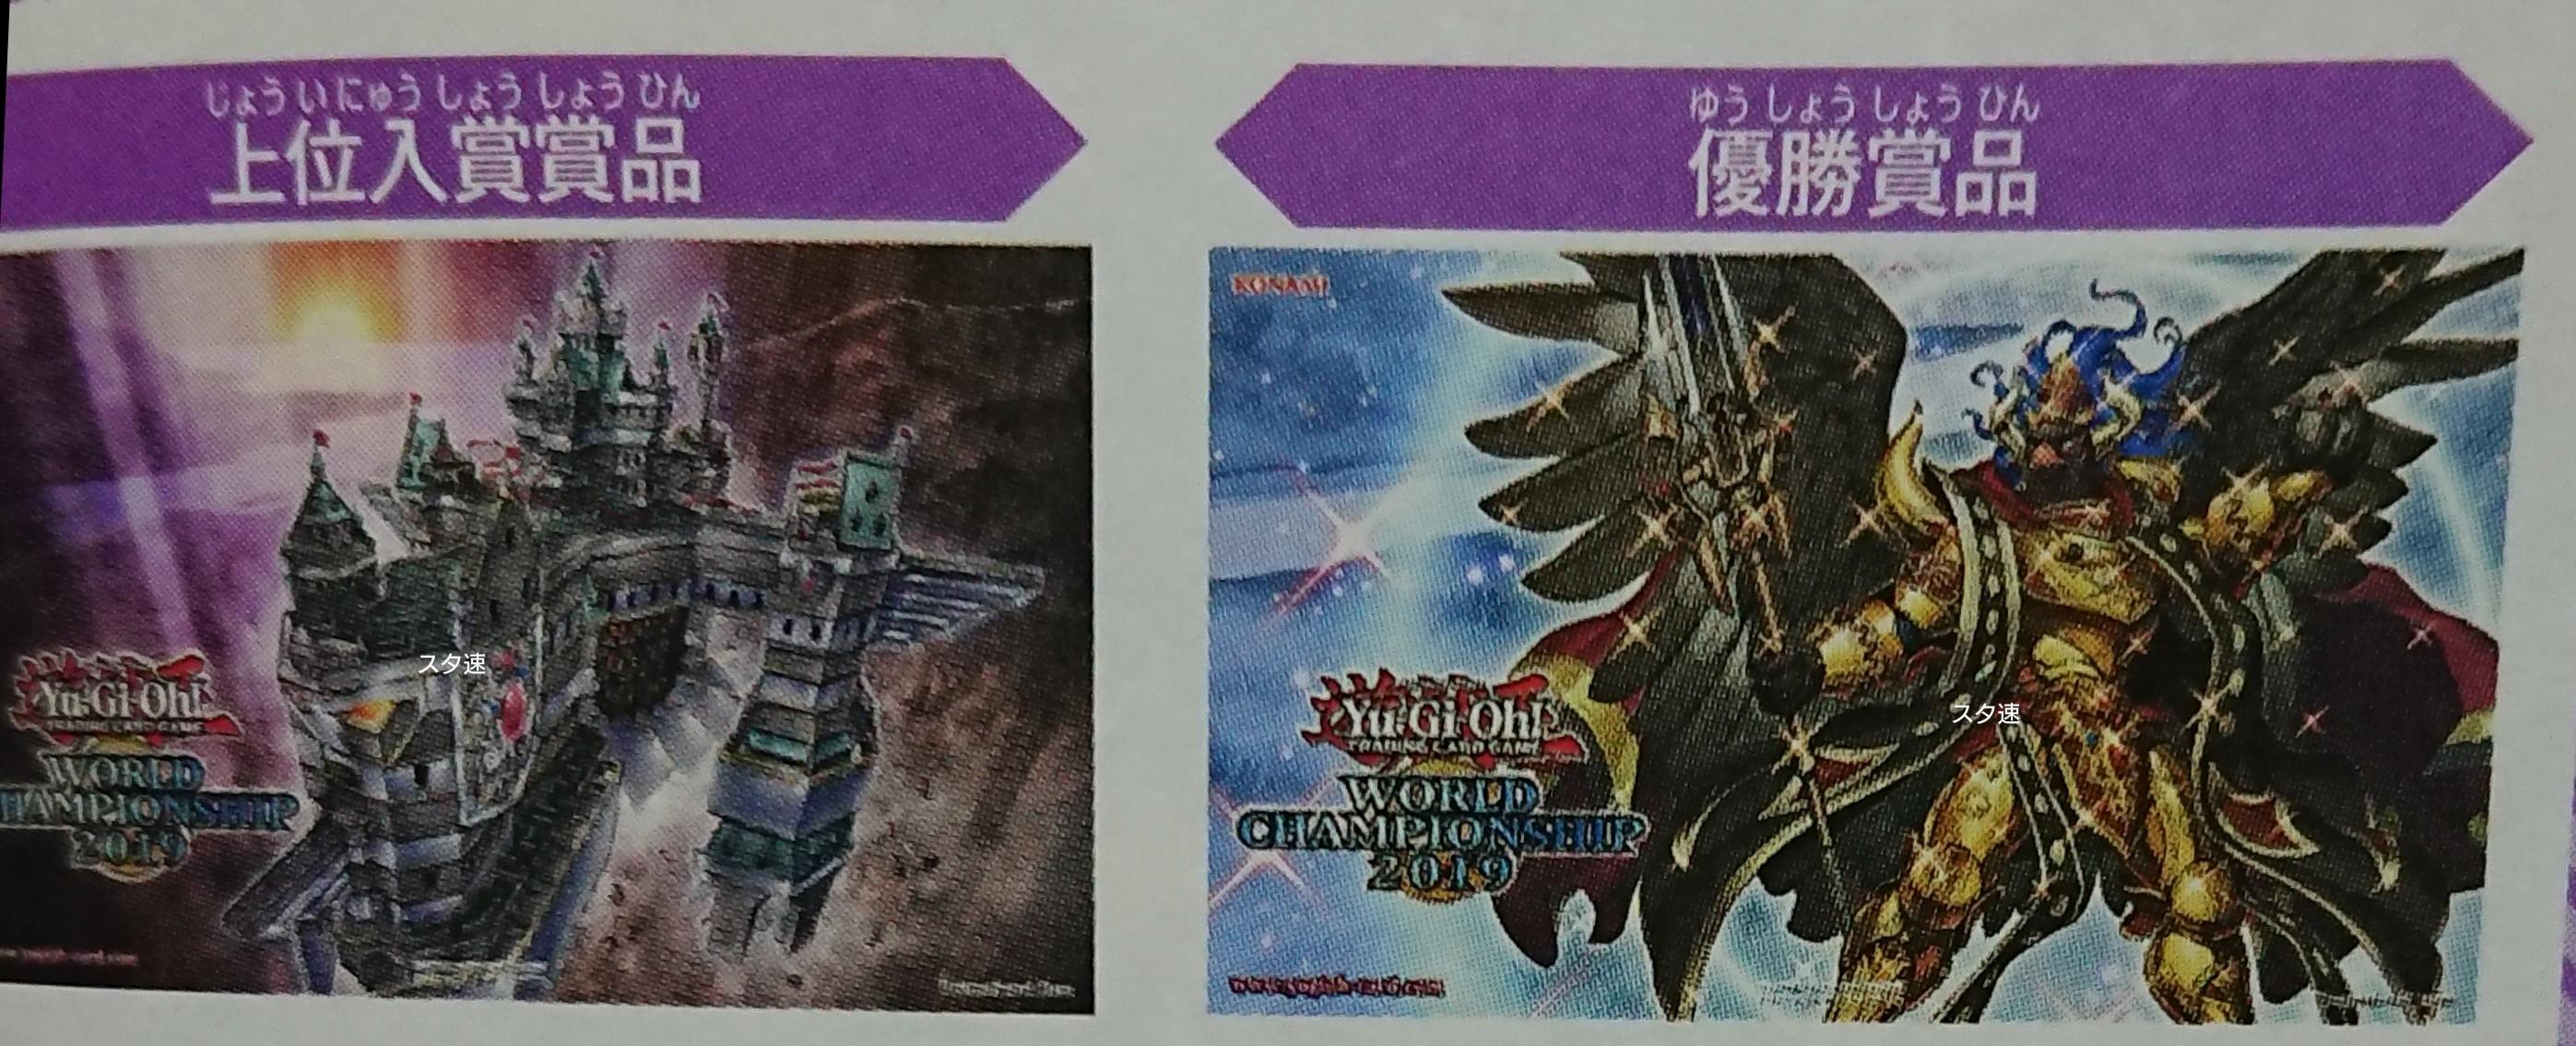 YGOrganization  [TCG] The 2017 to 2018 YCS Prize Card and Other